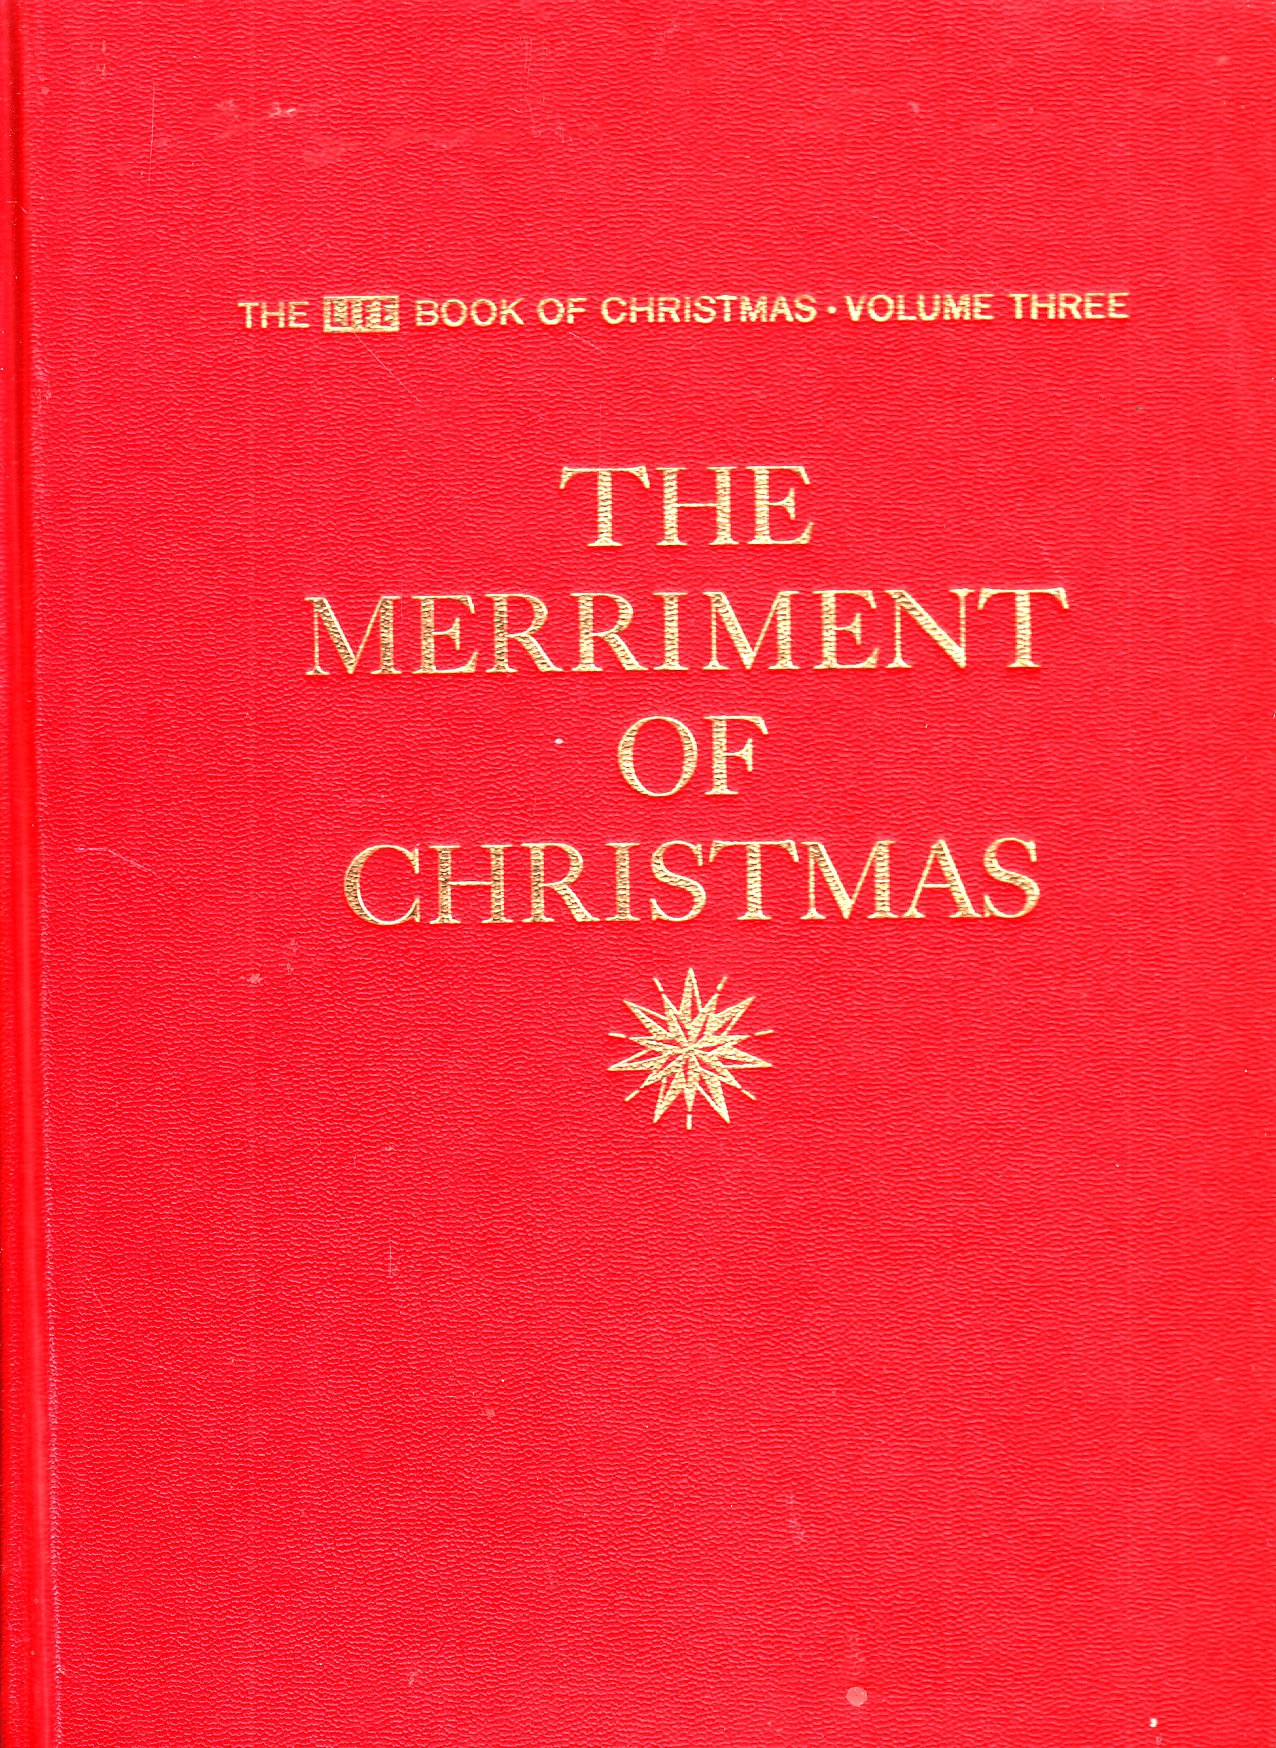 Image for The Merriment of Christmas The Life Book of Christmas, Volume Three